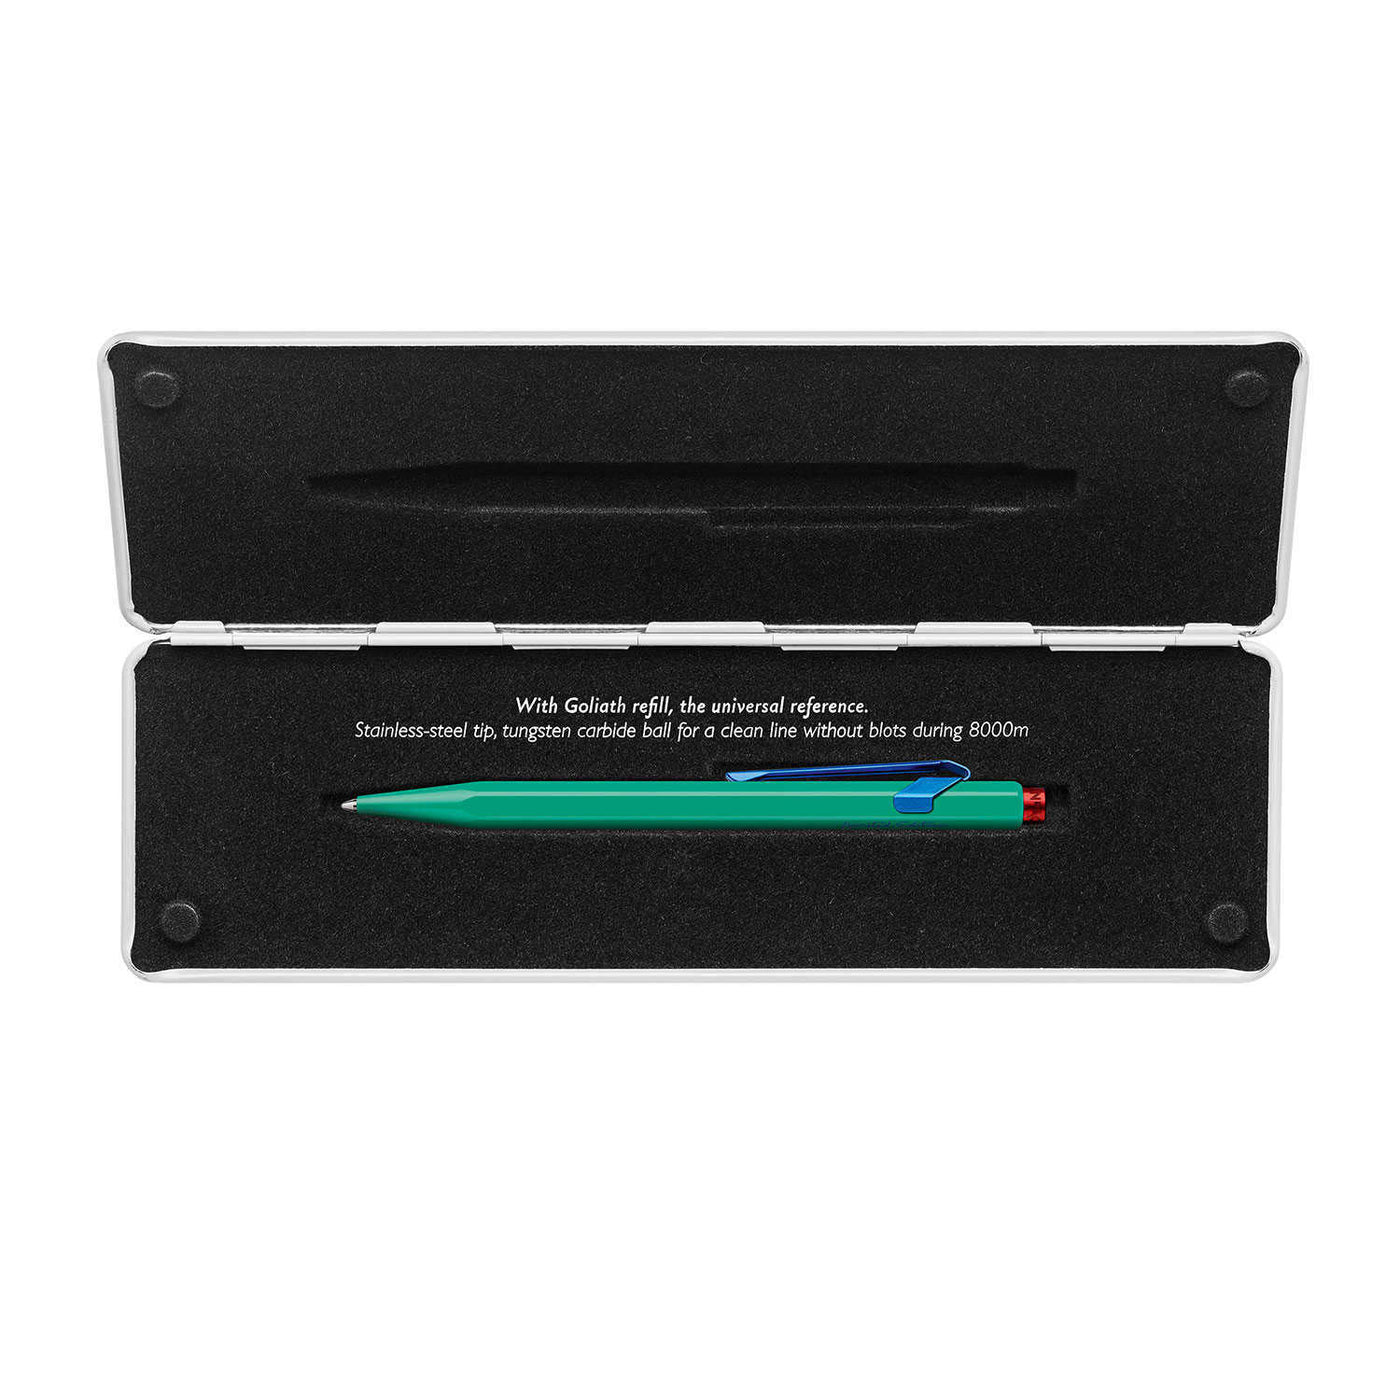 Caran d'Ache 849 Claim Your Style Ball Pen - Veronese Green (Limited Edition) 3